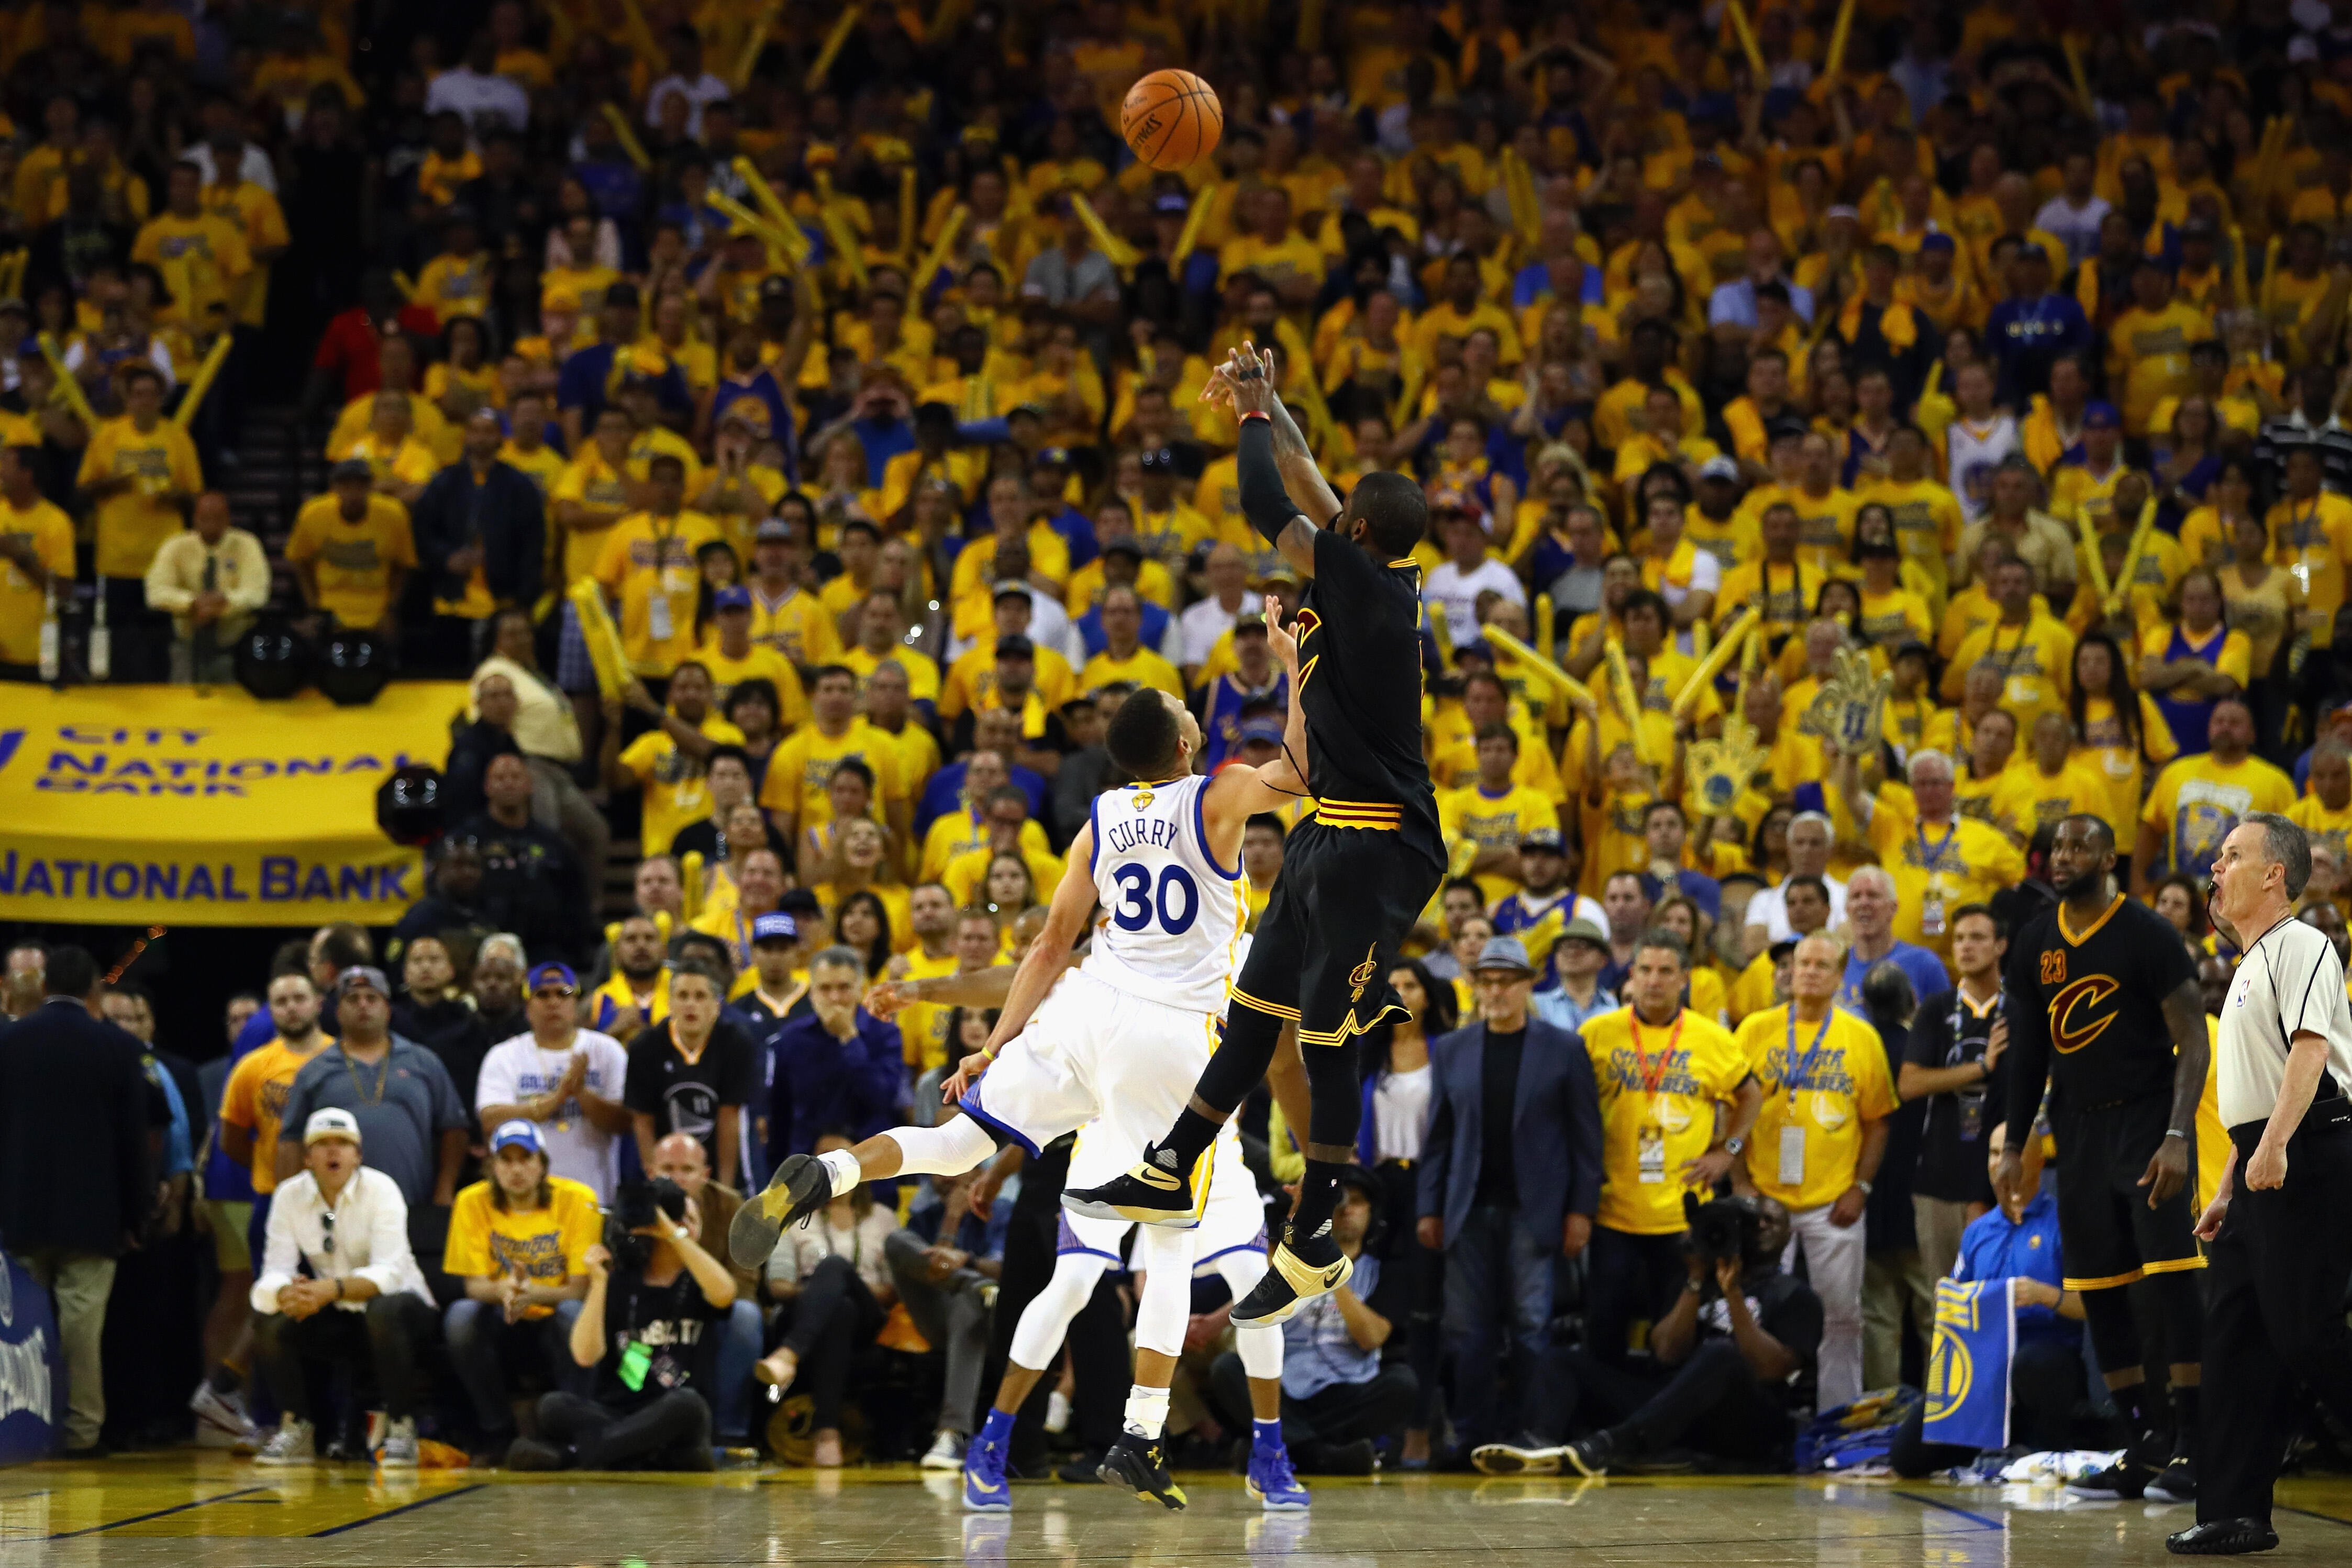 OAKLAND, CA - JUNE 19:  Kyrie Irving #2 of the Cleveland Cavaliers shoots a three-point basket late in the fourth quarter against Stephen Curry #30 of the Golden State Warriors in Game 7 of the 2016 NBA Finals at ORACLE Arena on June 19, 2016 in Oakland, 